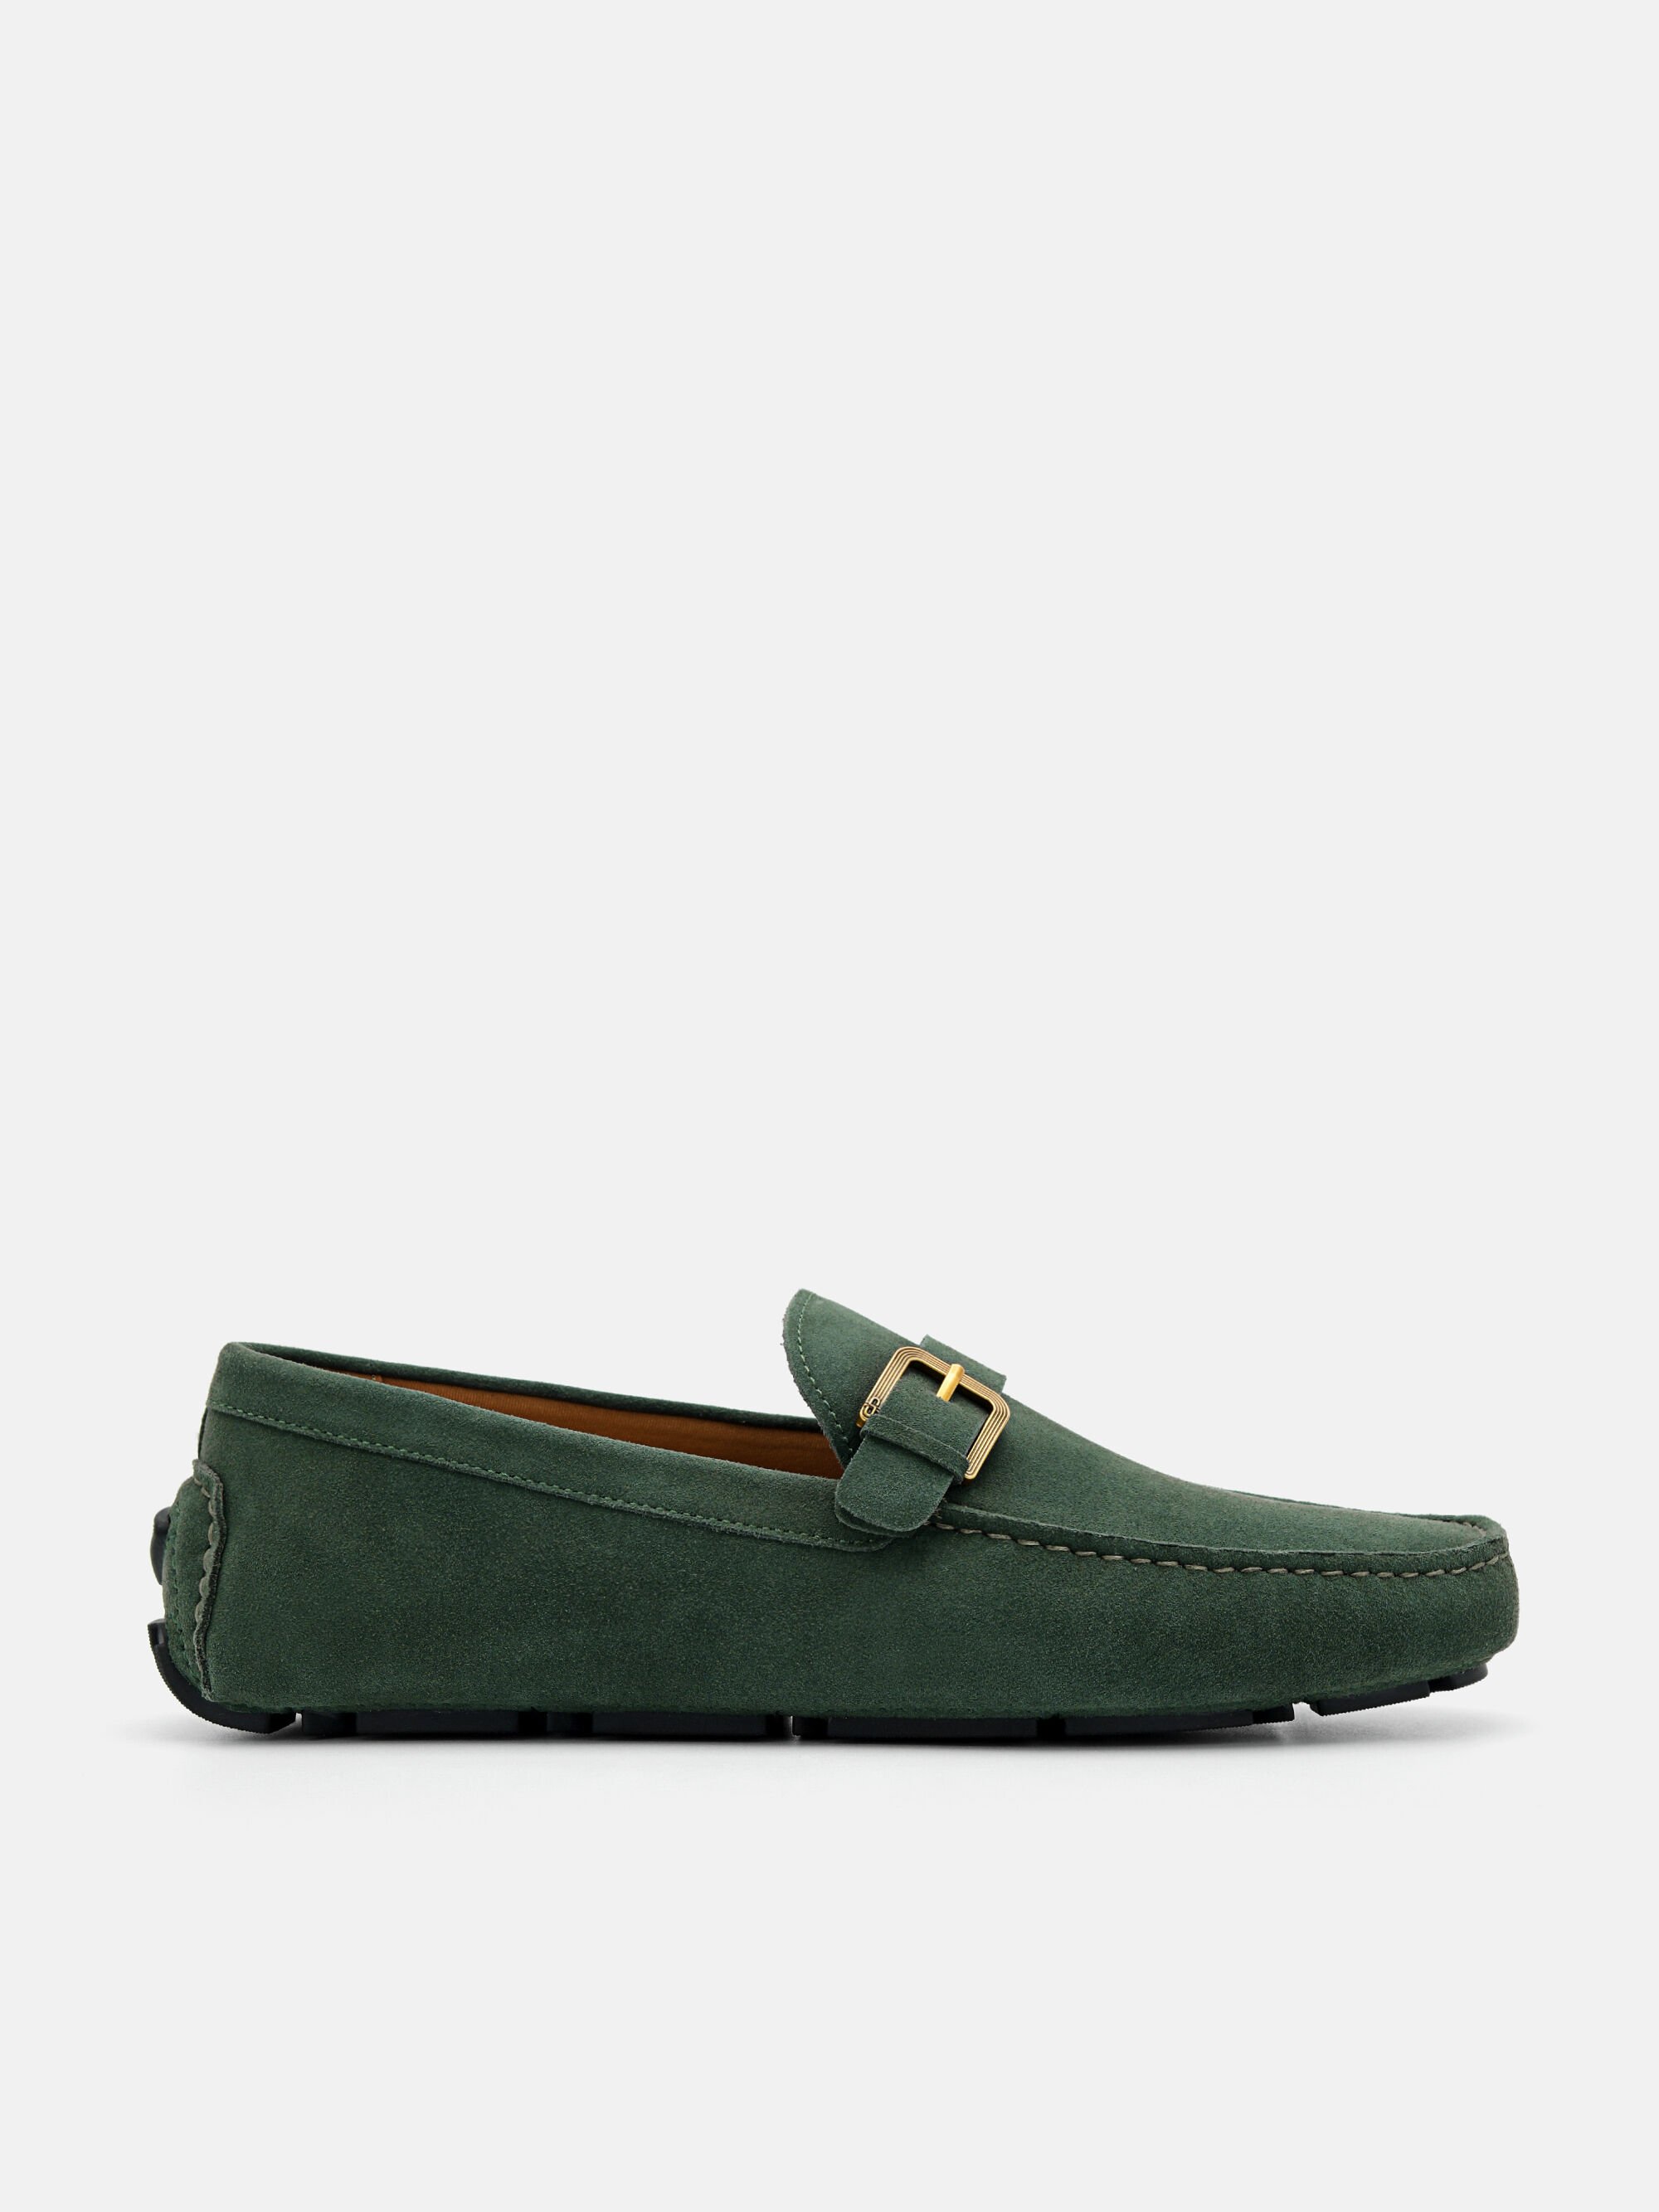 Gio Leather Driving Shoes, Dark Green